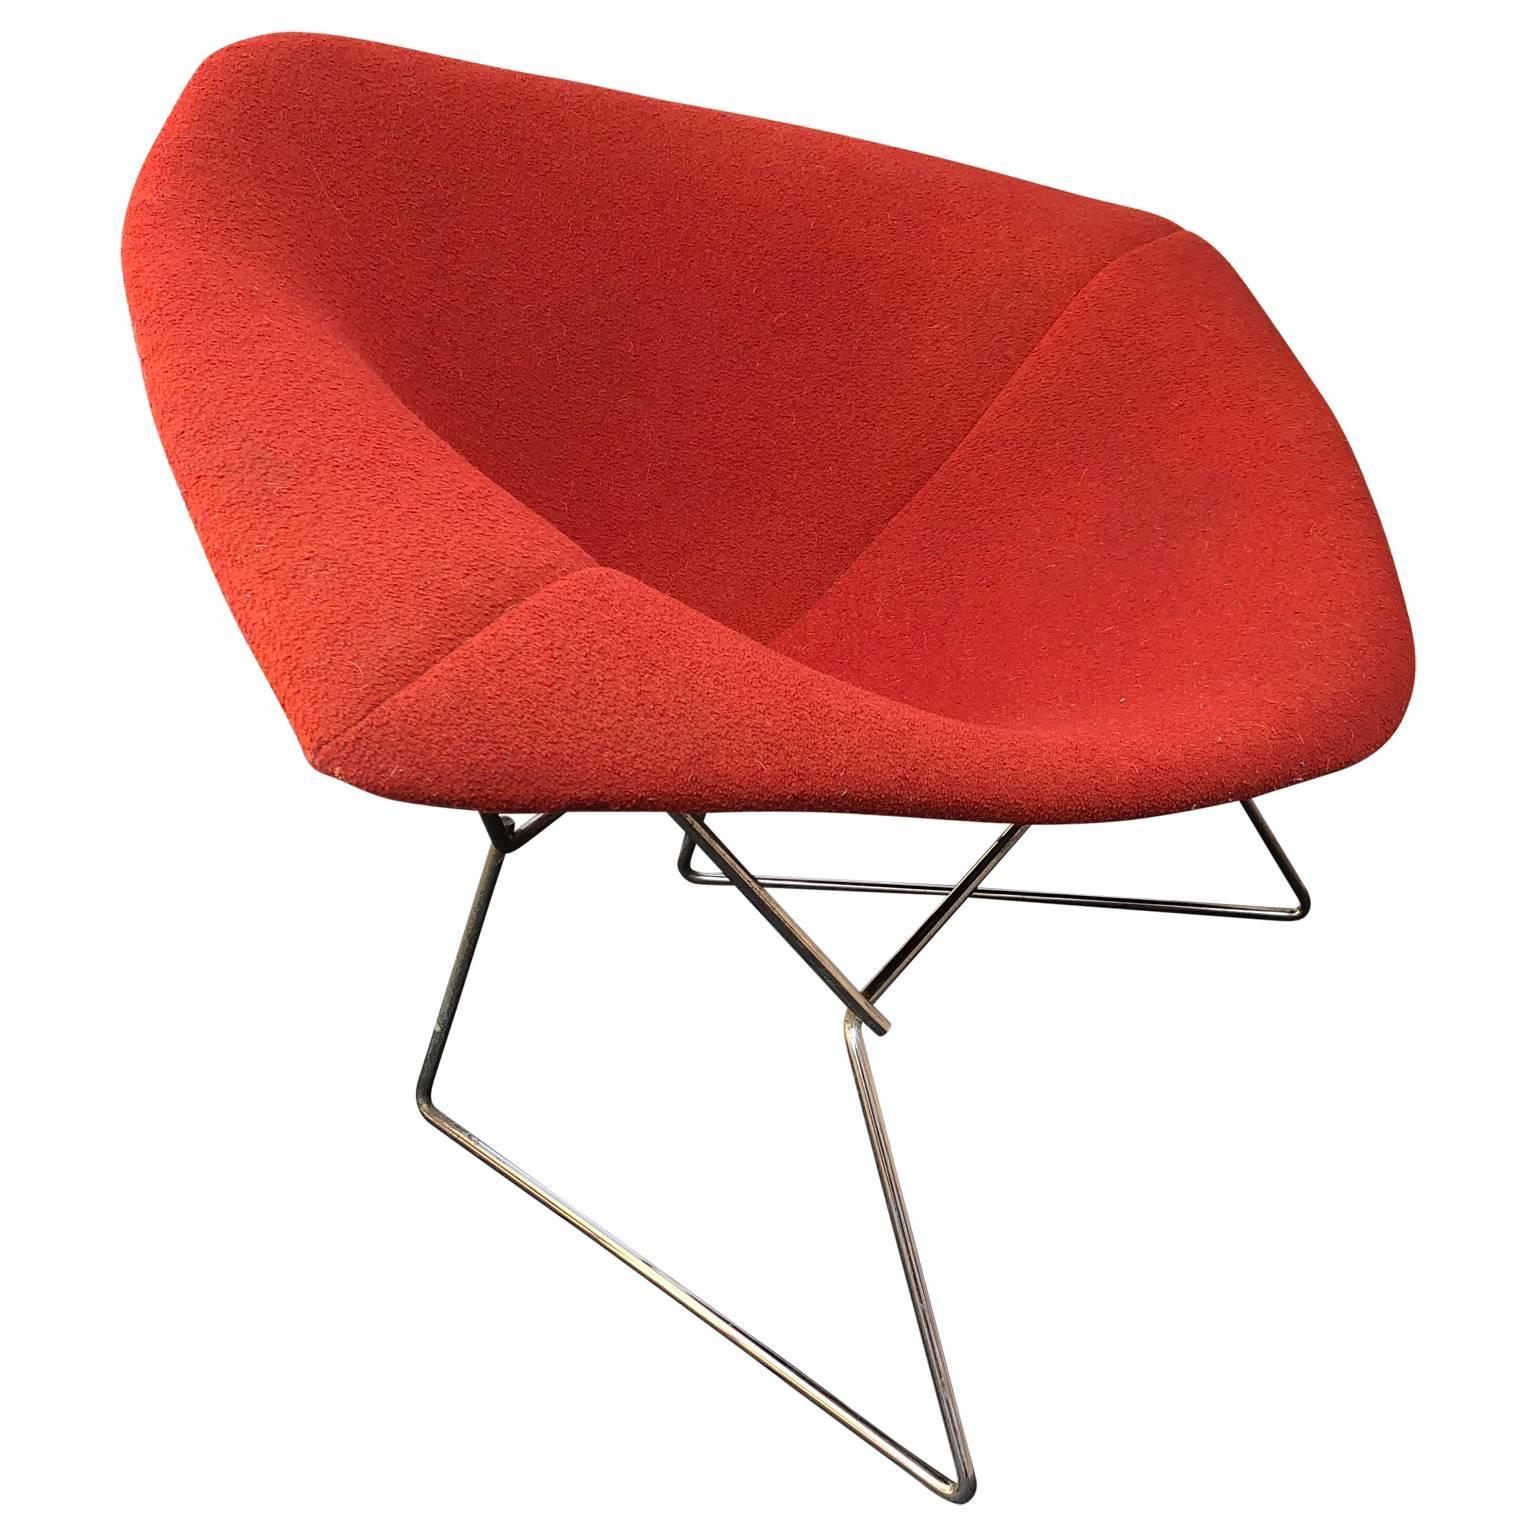 20th Century Harry Bertoia Diamond Chair and Ottoman for Knoll, circa 1950's For Sale